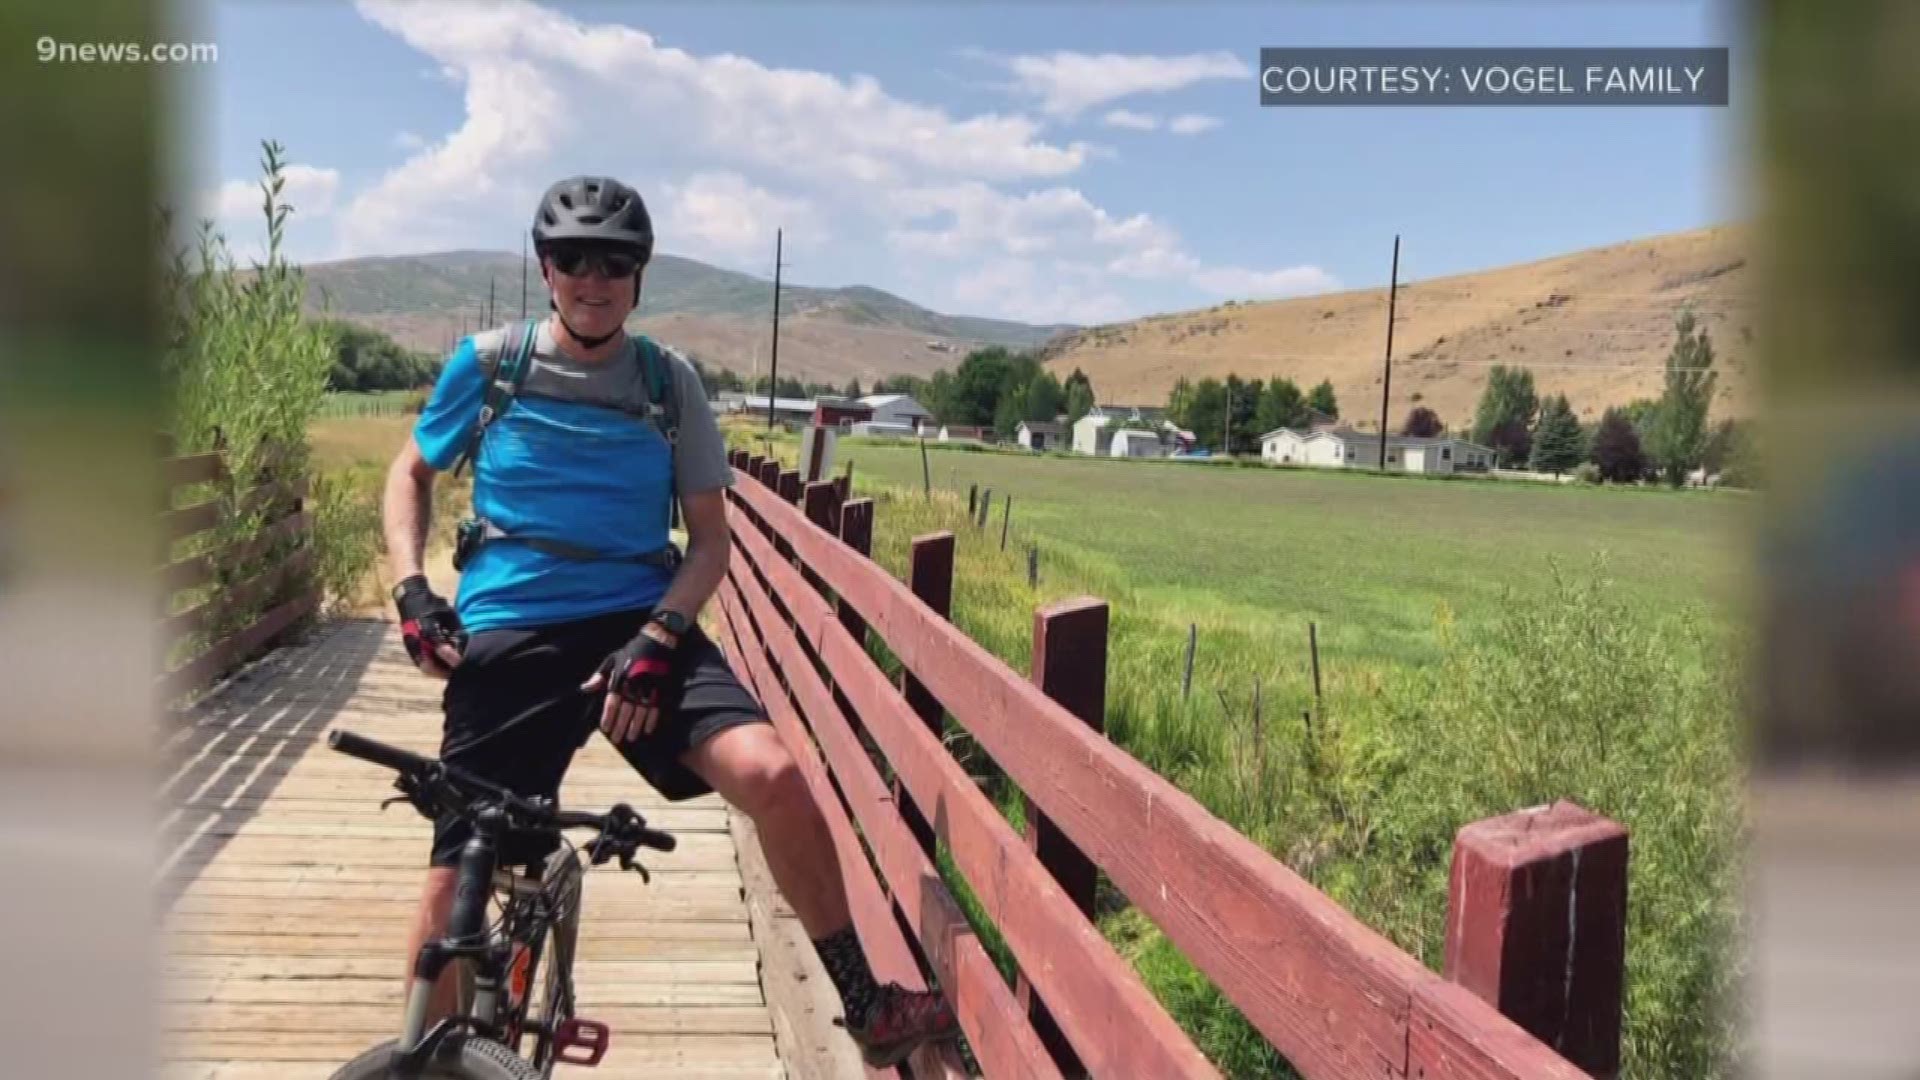 A 36-year-old man wanted in relation to a 4th of July hit-and-run wreck in Parker that killed a bicyclist was arrested in Scottsbluff, Nebraska on Tuesday, according to the Douglas County Sheriff’s Office.